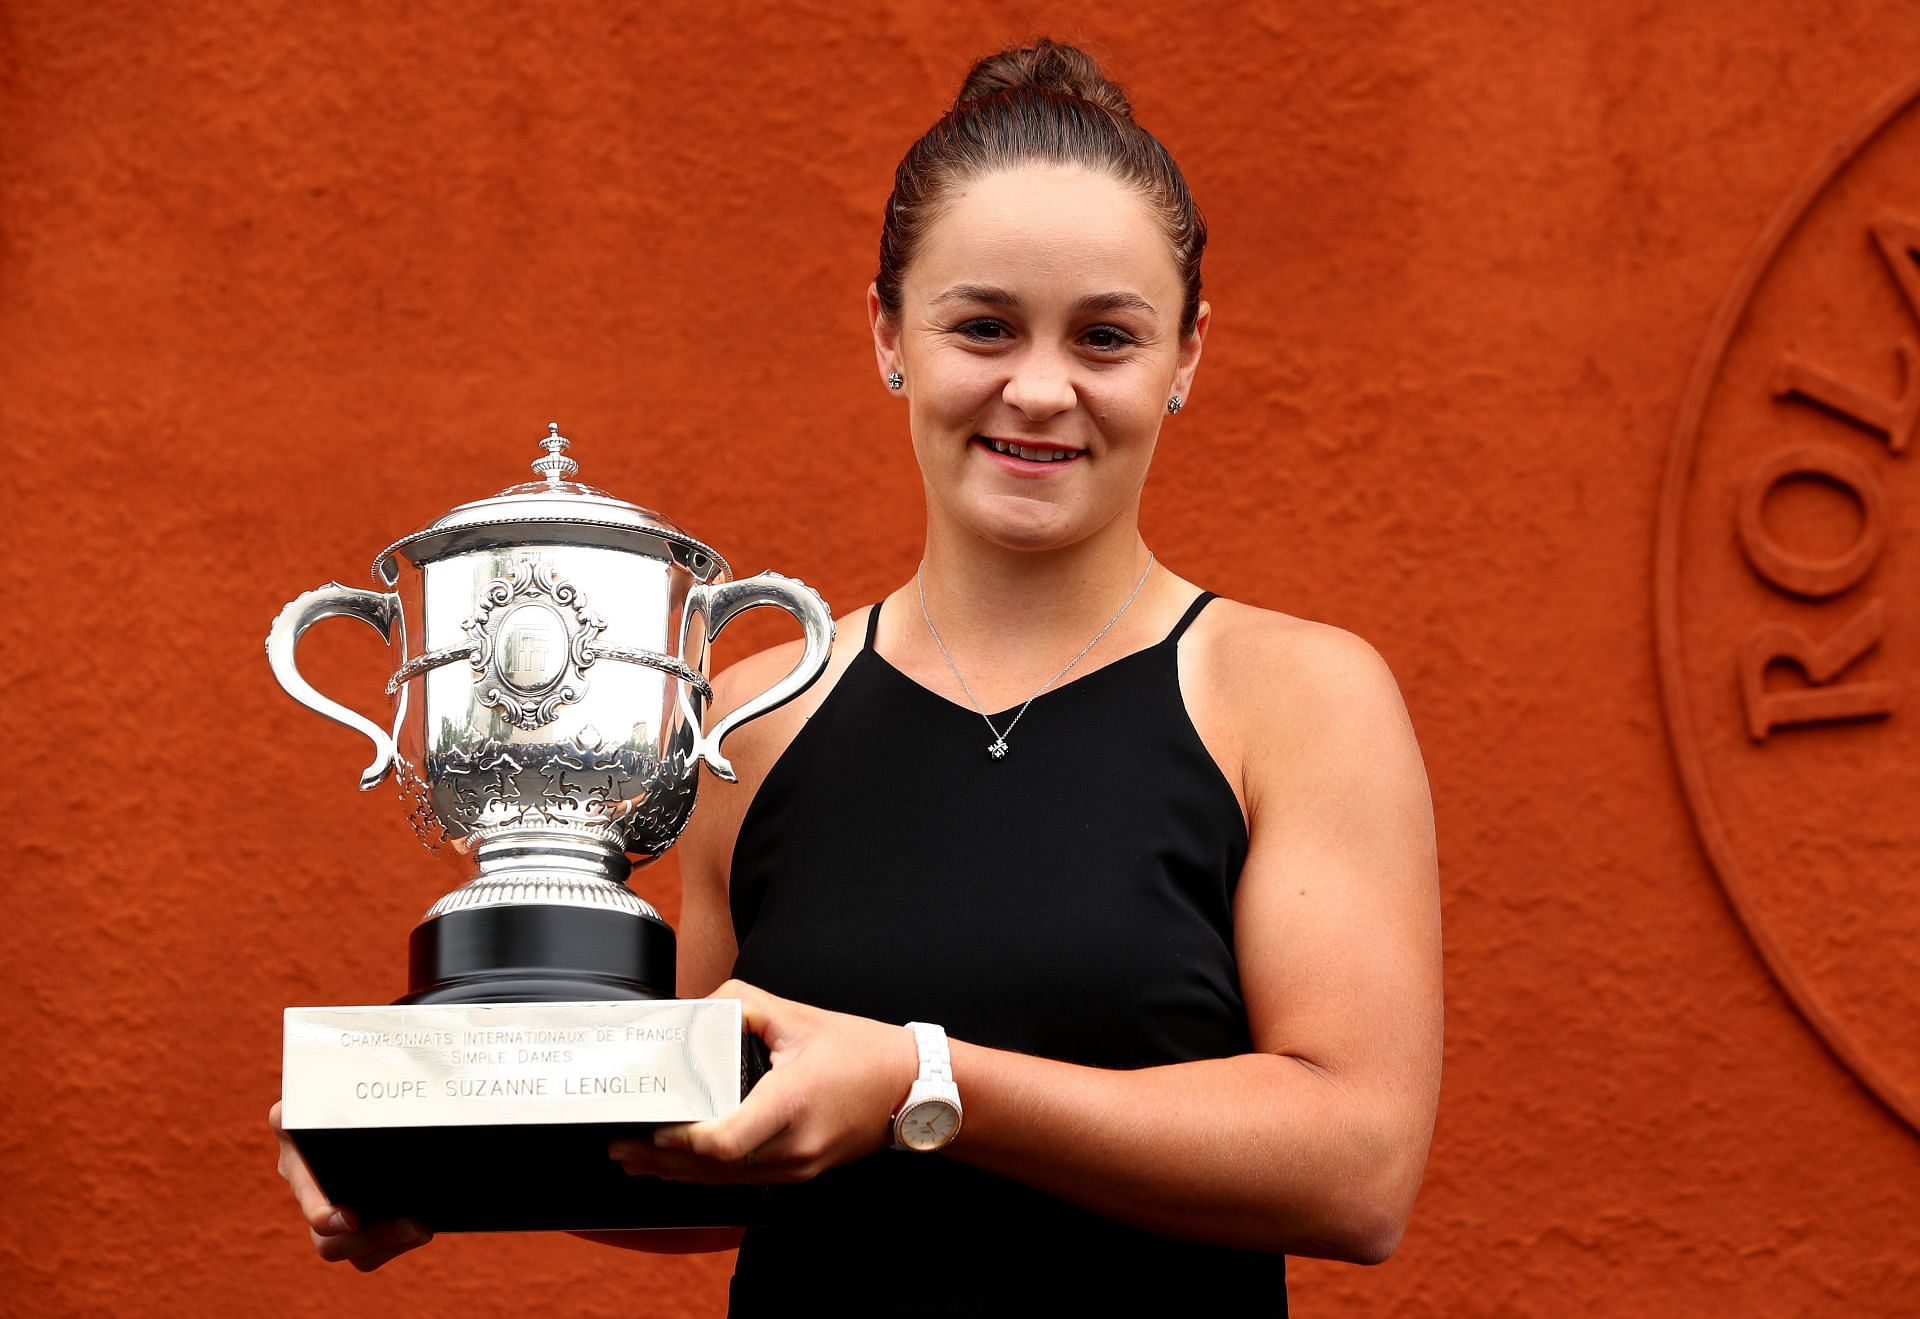 Ashleigh Barty with the French Open 2019 title